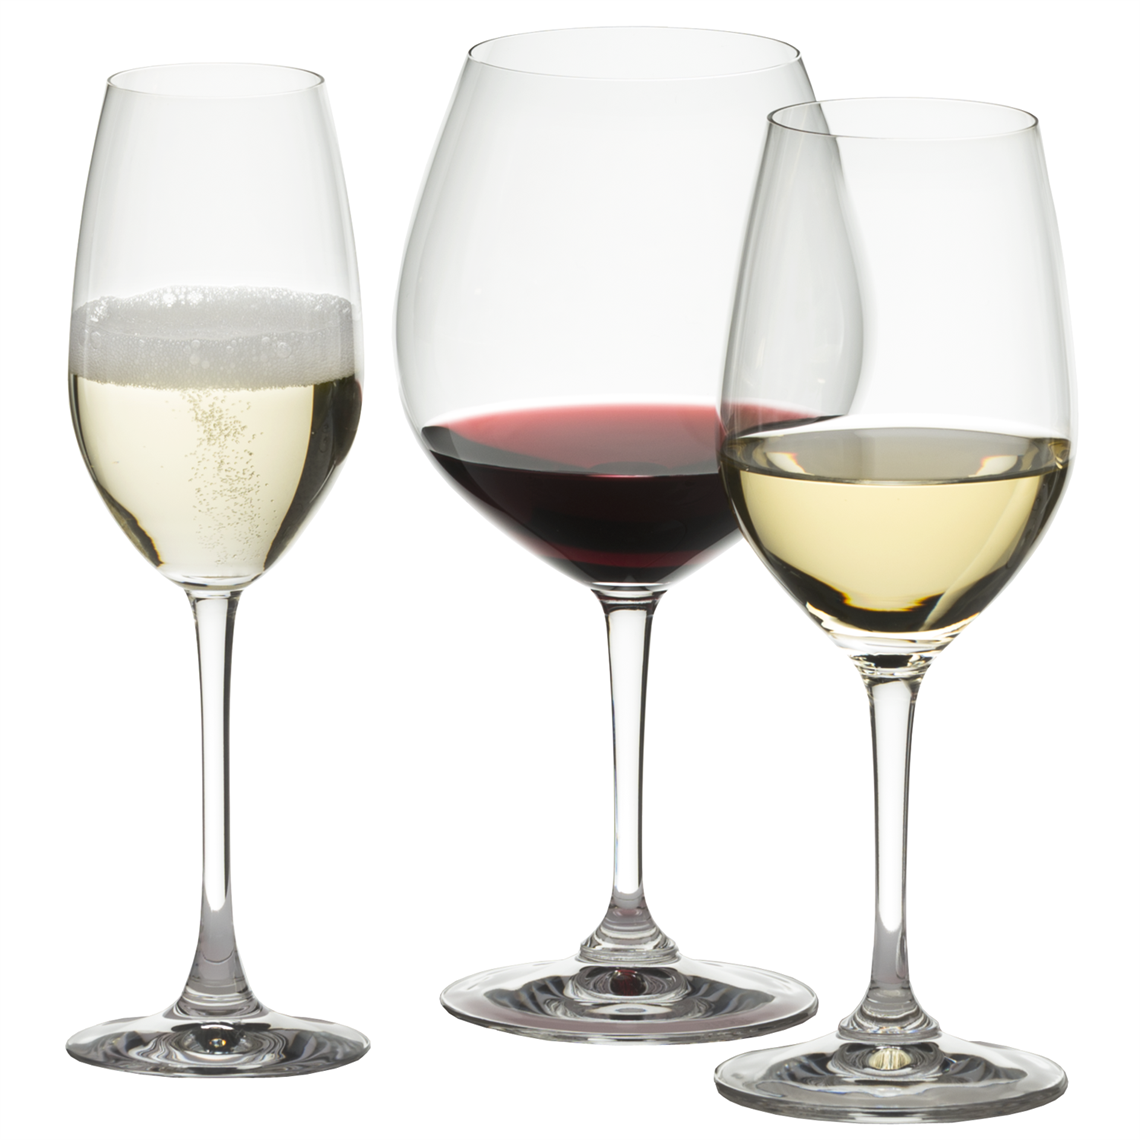 View more riedel from our Restaurant & Trade Glasses range